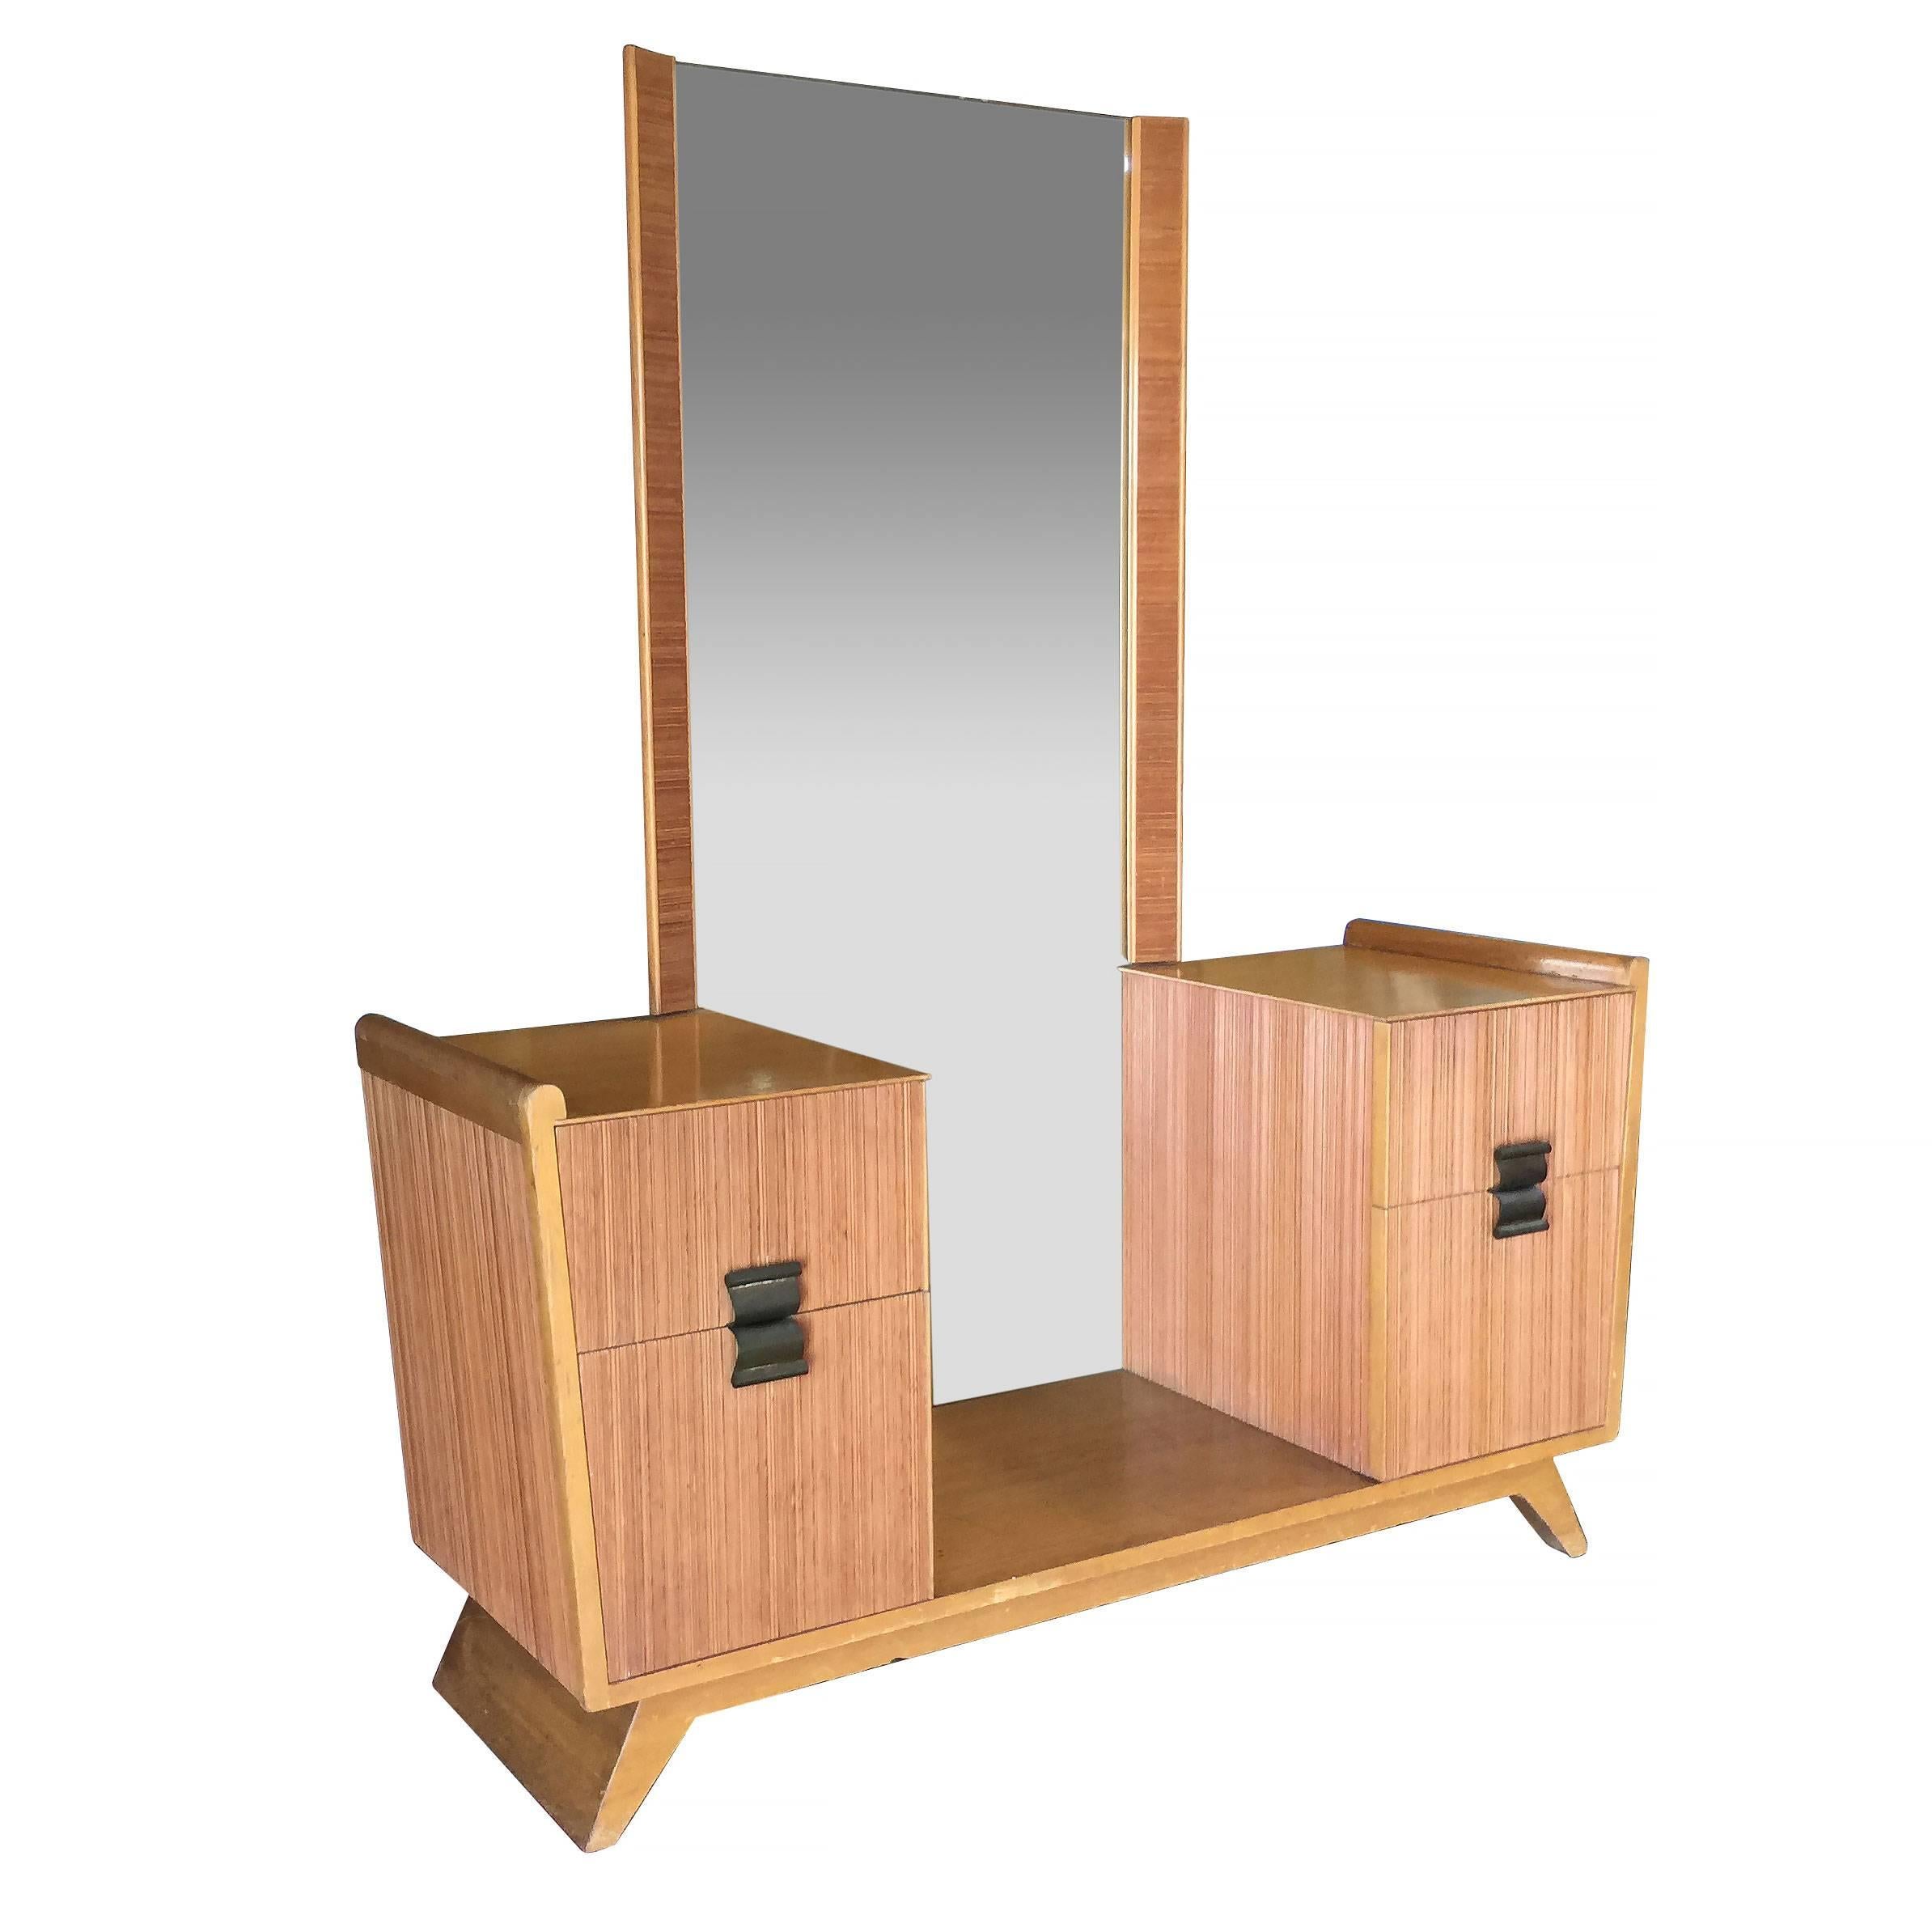 Midcentury vanity with matching stool by Paul Frankl for Brown Saltman company features his trademark combed wood sides with curled brass pulls. Professionally restored. 

Measures: Stool: 18 in. H x 22 in. W x 18 in. D
Vanity: 64.5 in. H x 54